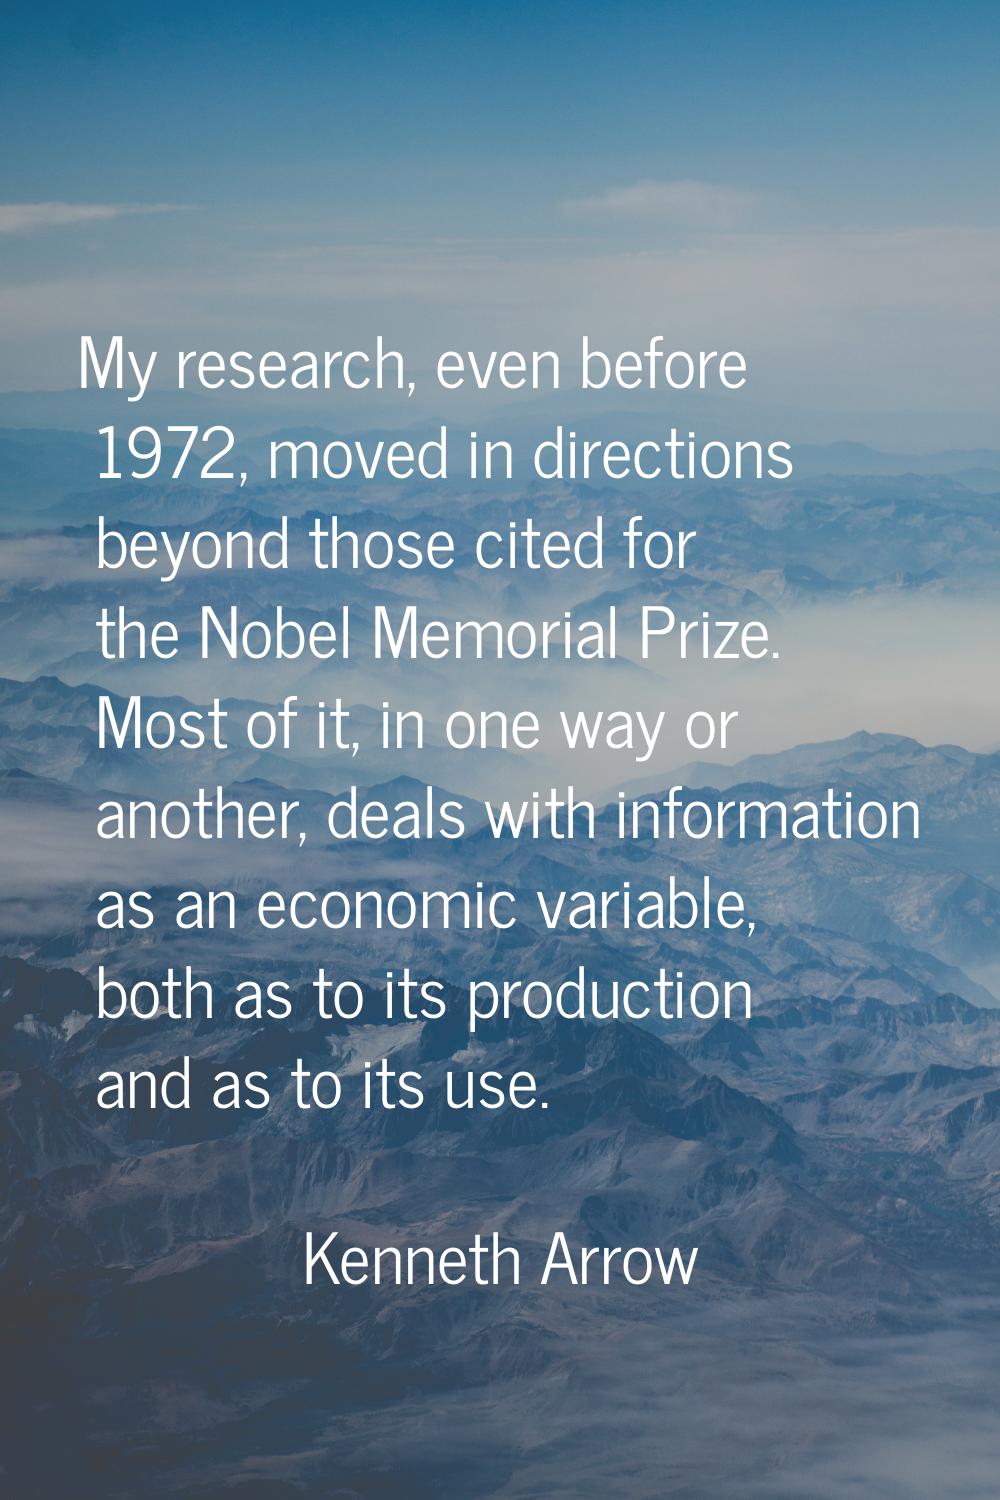 My research, even before 1972, moved in directions beyond those cited for the Nobel Memorial Prize.